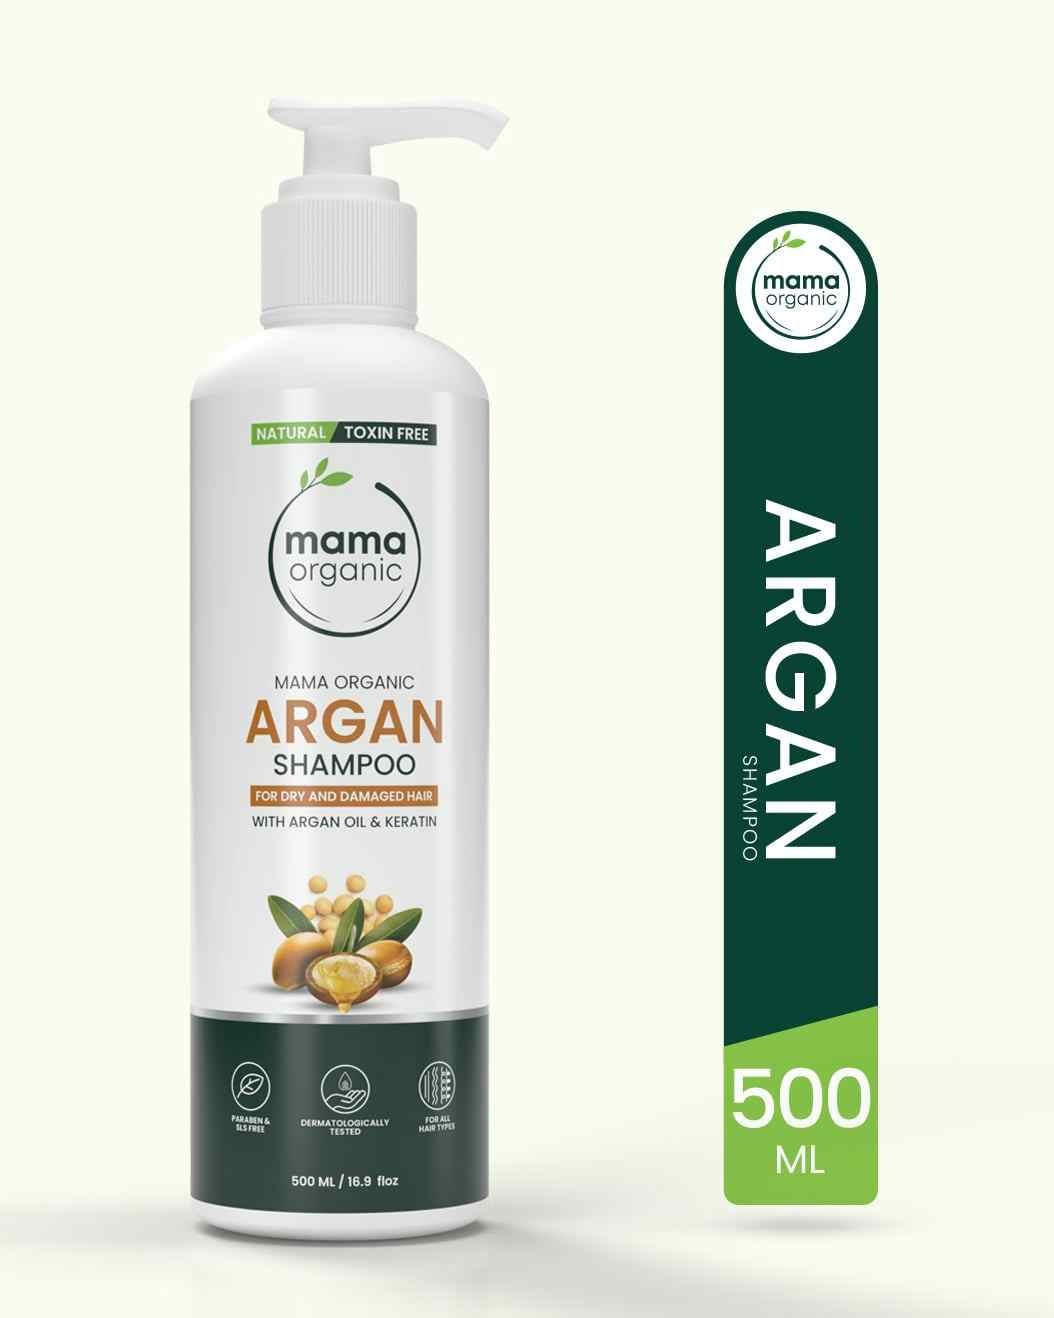 Mama Organic Argan Shampoo & Conditioner For Hair Loss | For Hair Growth | For Men & Women | Natural & Toxin-Free - 500ml